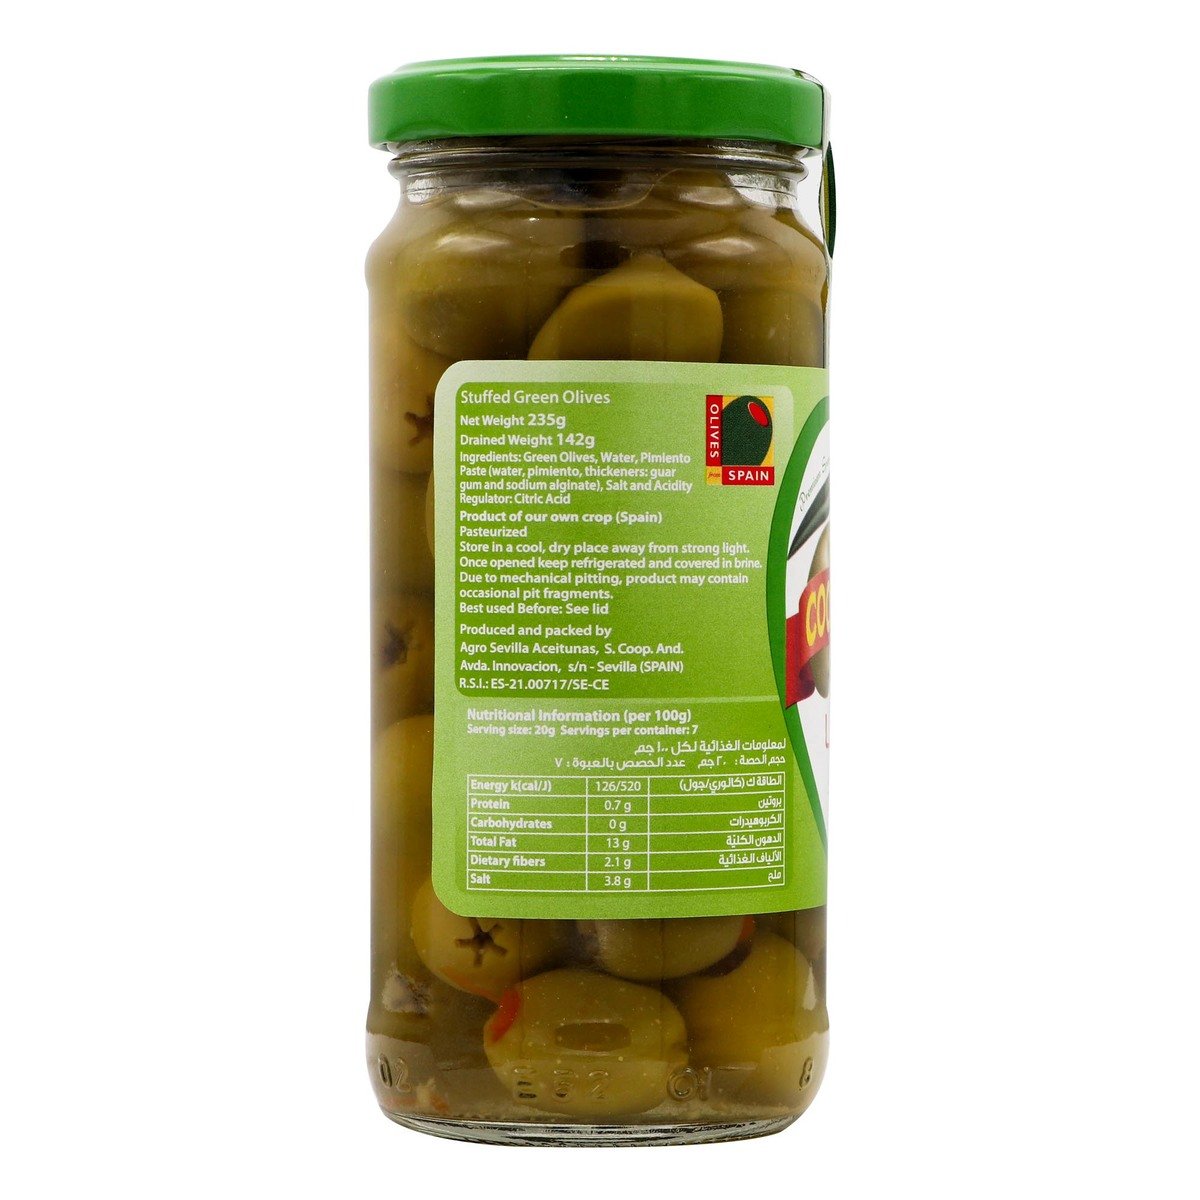 Coopoliva Stuffed Green Olives 235g